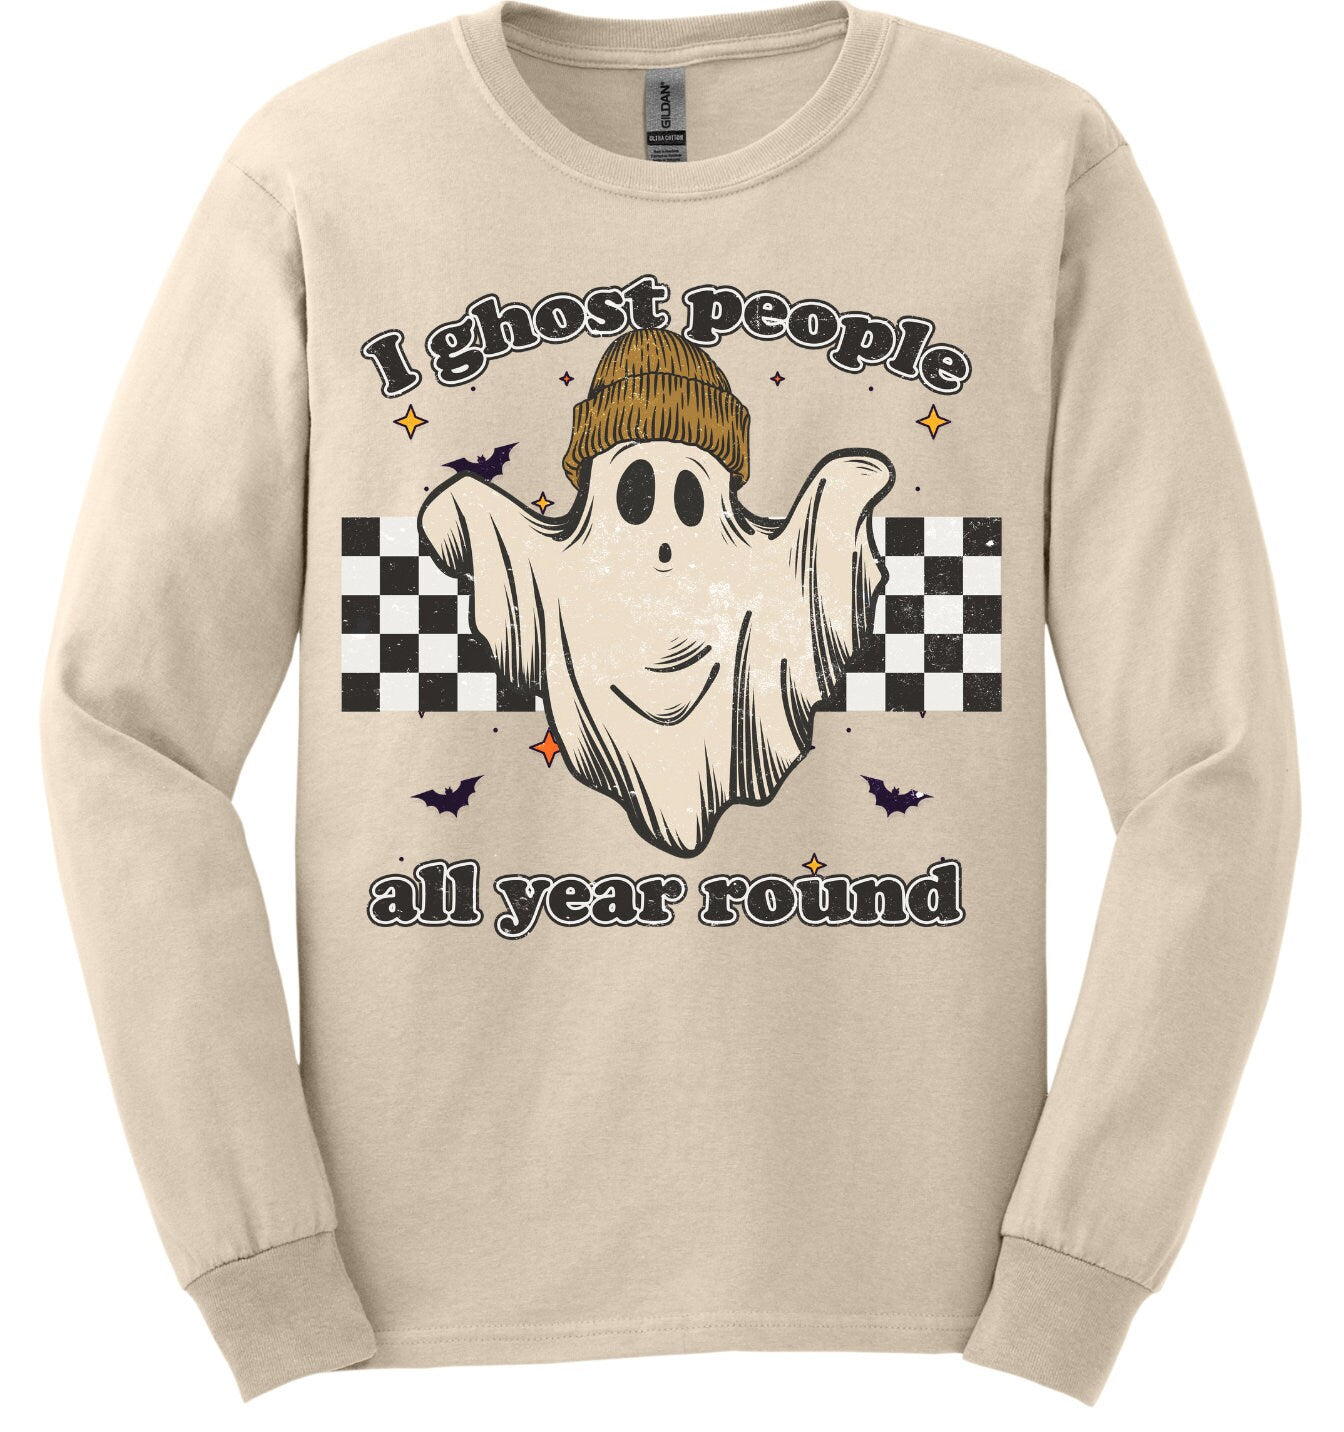 I Ghost People, Long Sleeve and Short Sleeve Cotton Shirt, Adult Tee